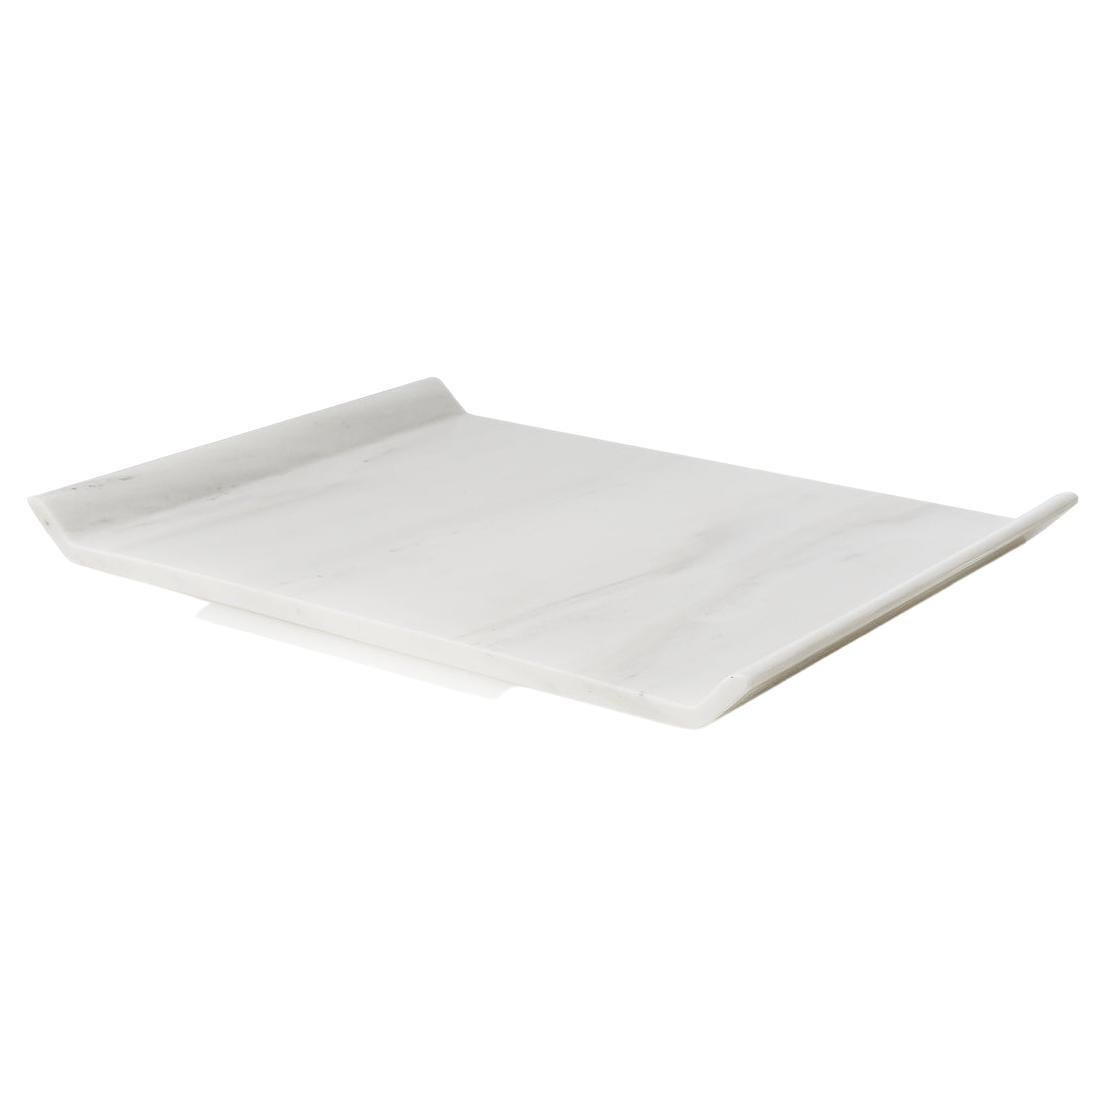 This platter is designed as a homogeneous volume, wishing to engage the senses around the plasticity of marble. It is carved off a single piece of marble without joints or seams.

Io platter has a fine mat finish, revealing the unique color and vein